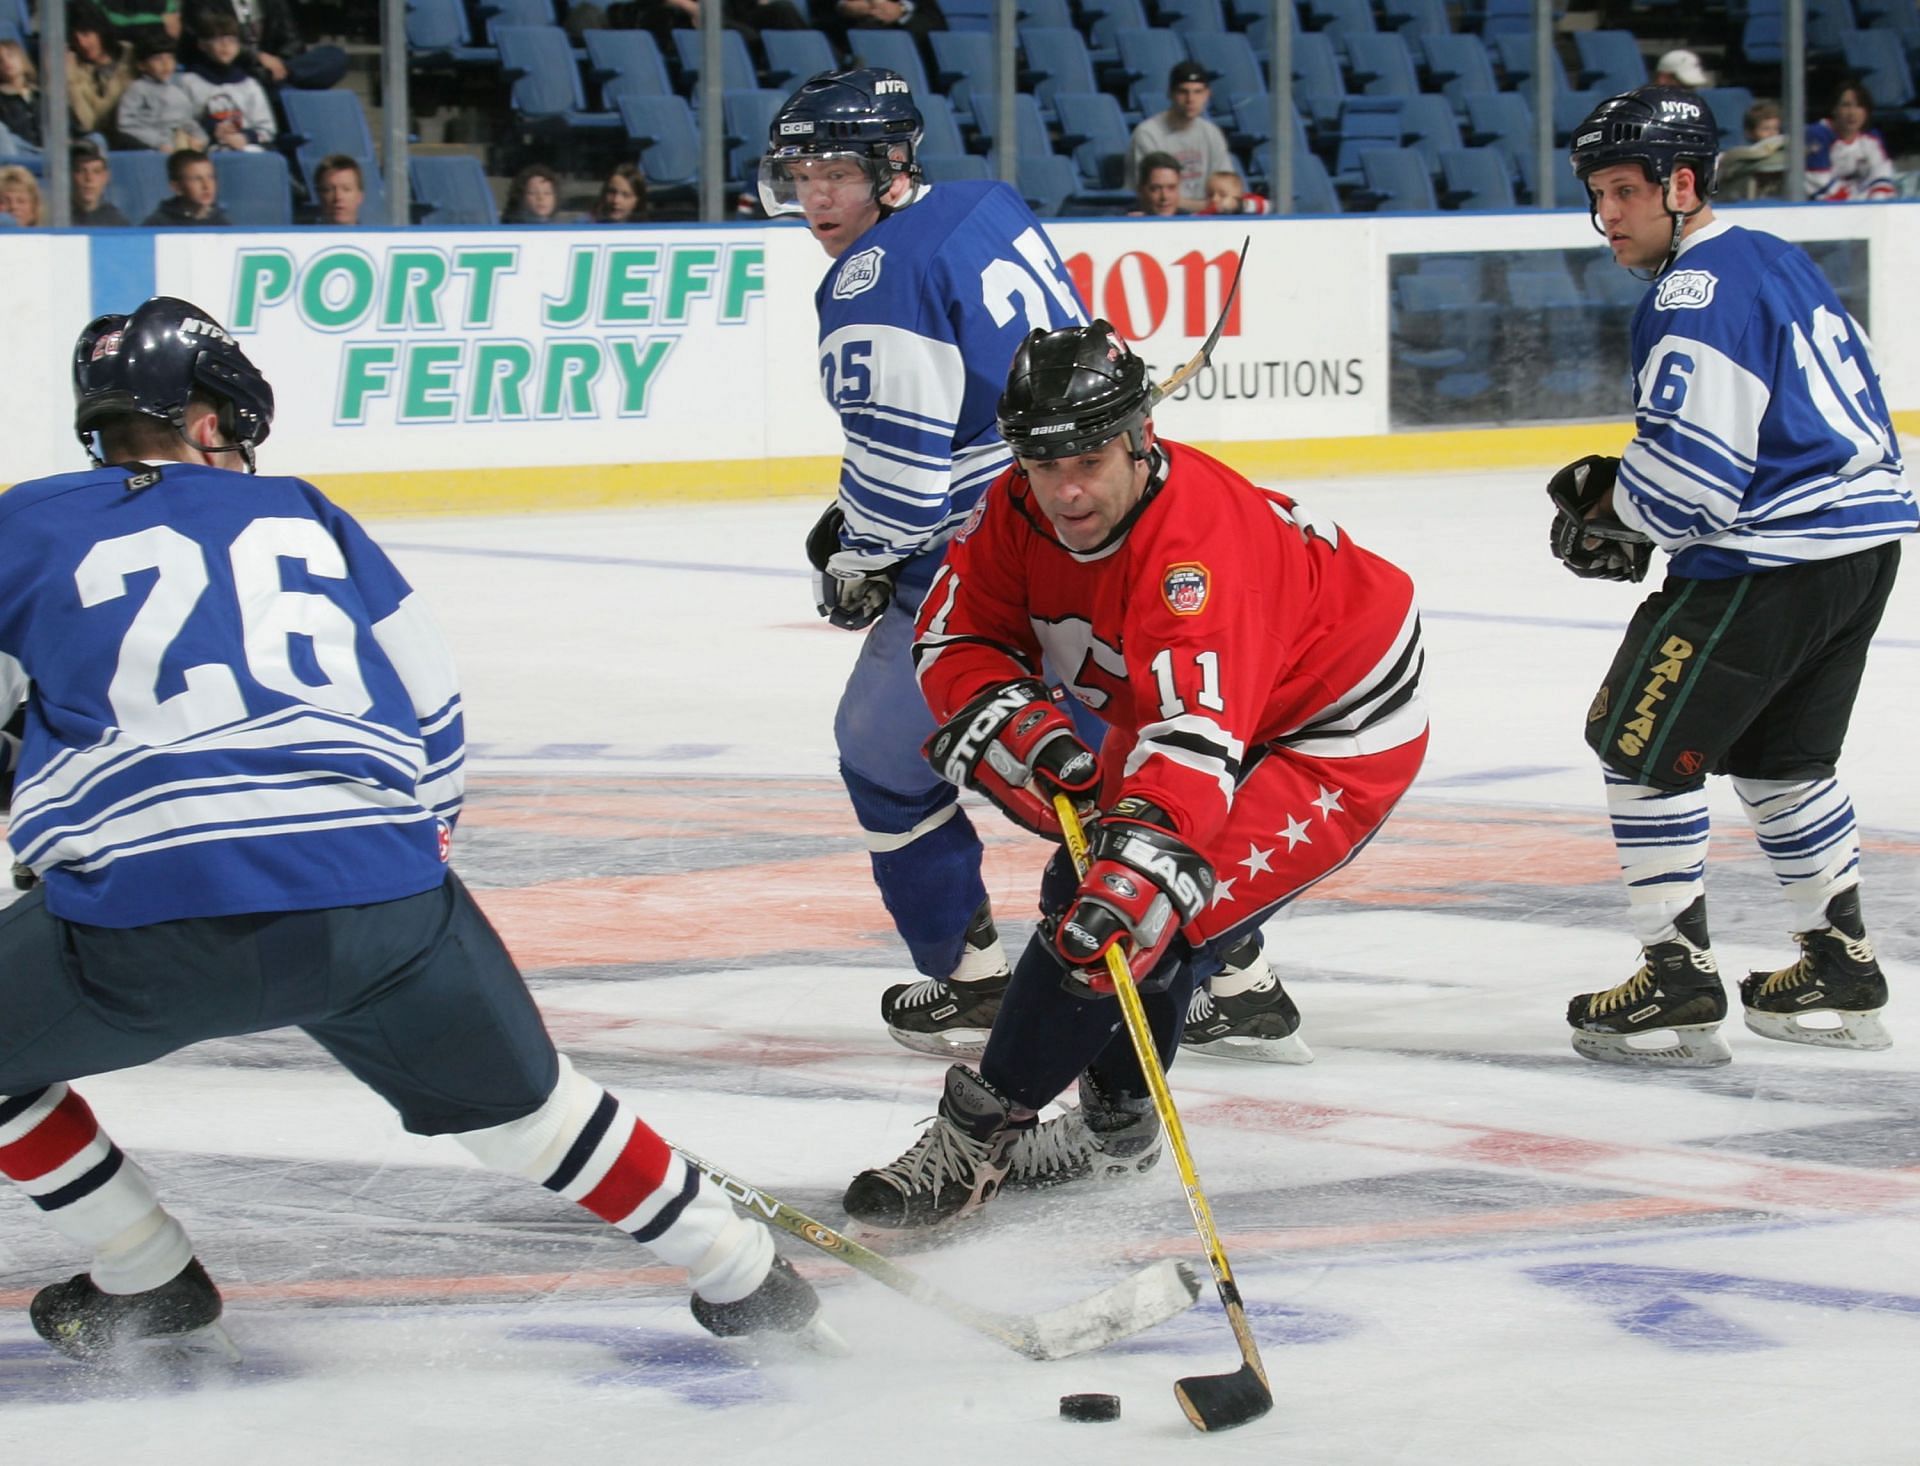 Charity Ice Hockey Game Between NYPD And FDNY Takes An Expected